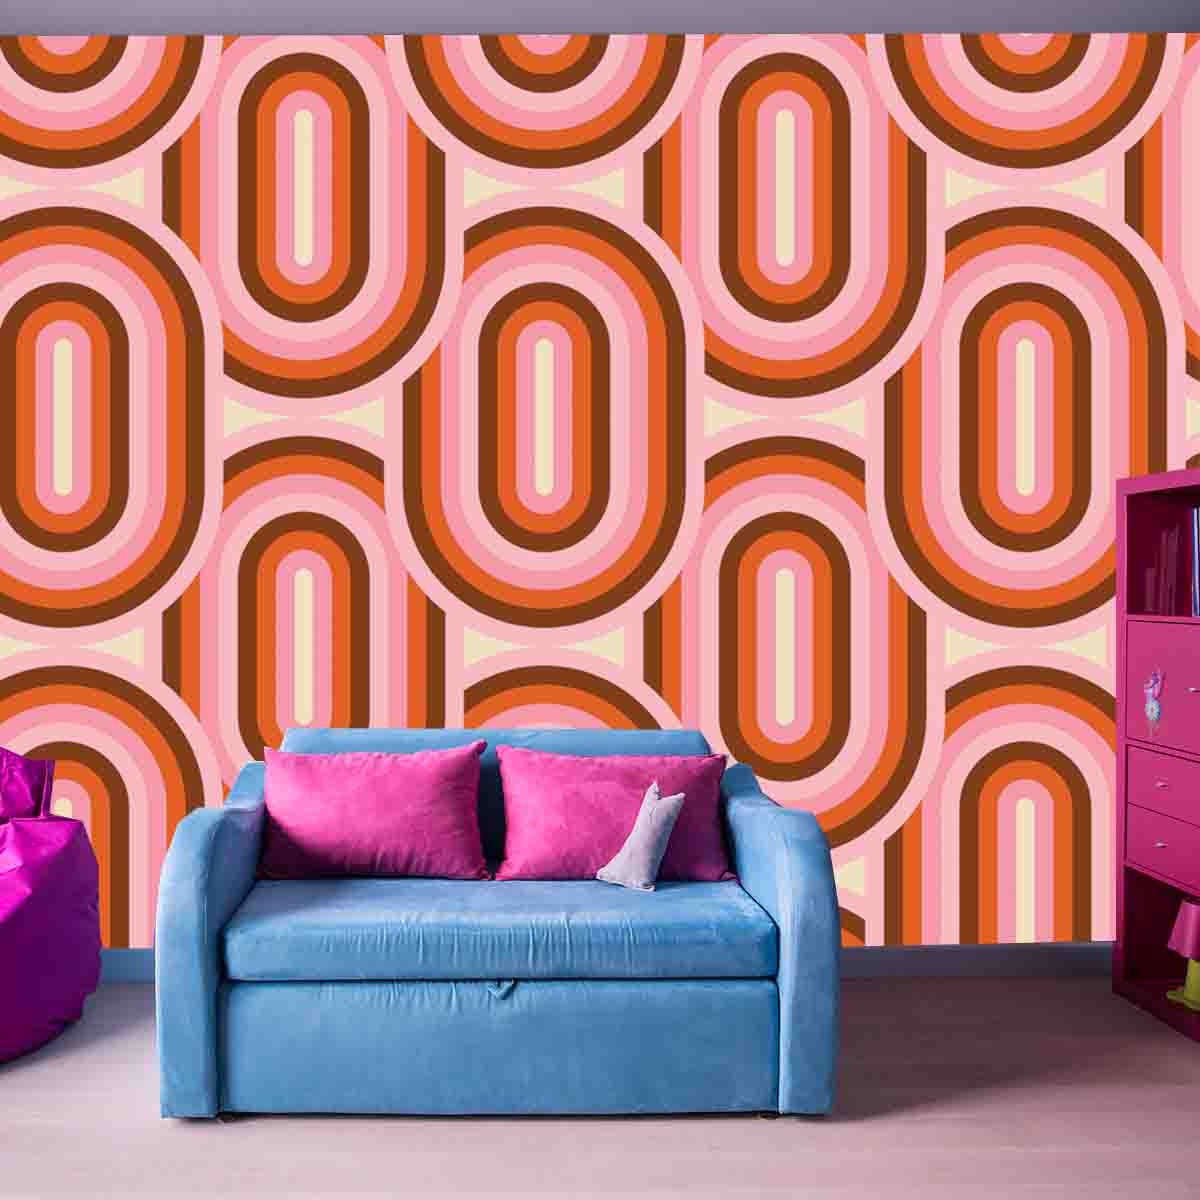 70's Retro Seamless Pattern. 60s and 70s Aesthetic Style Wallpaper Girl Bedroom Mural